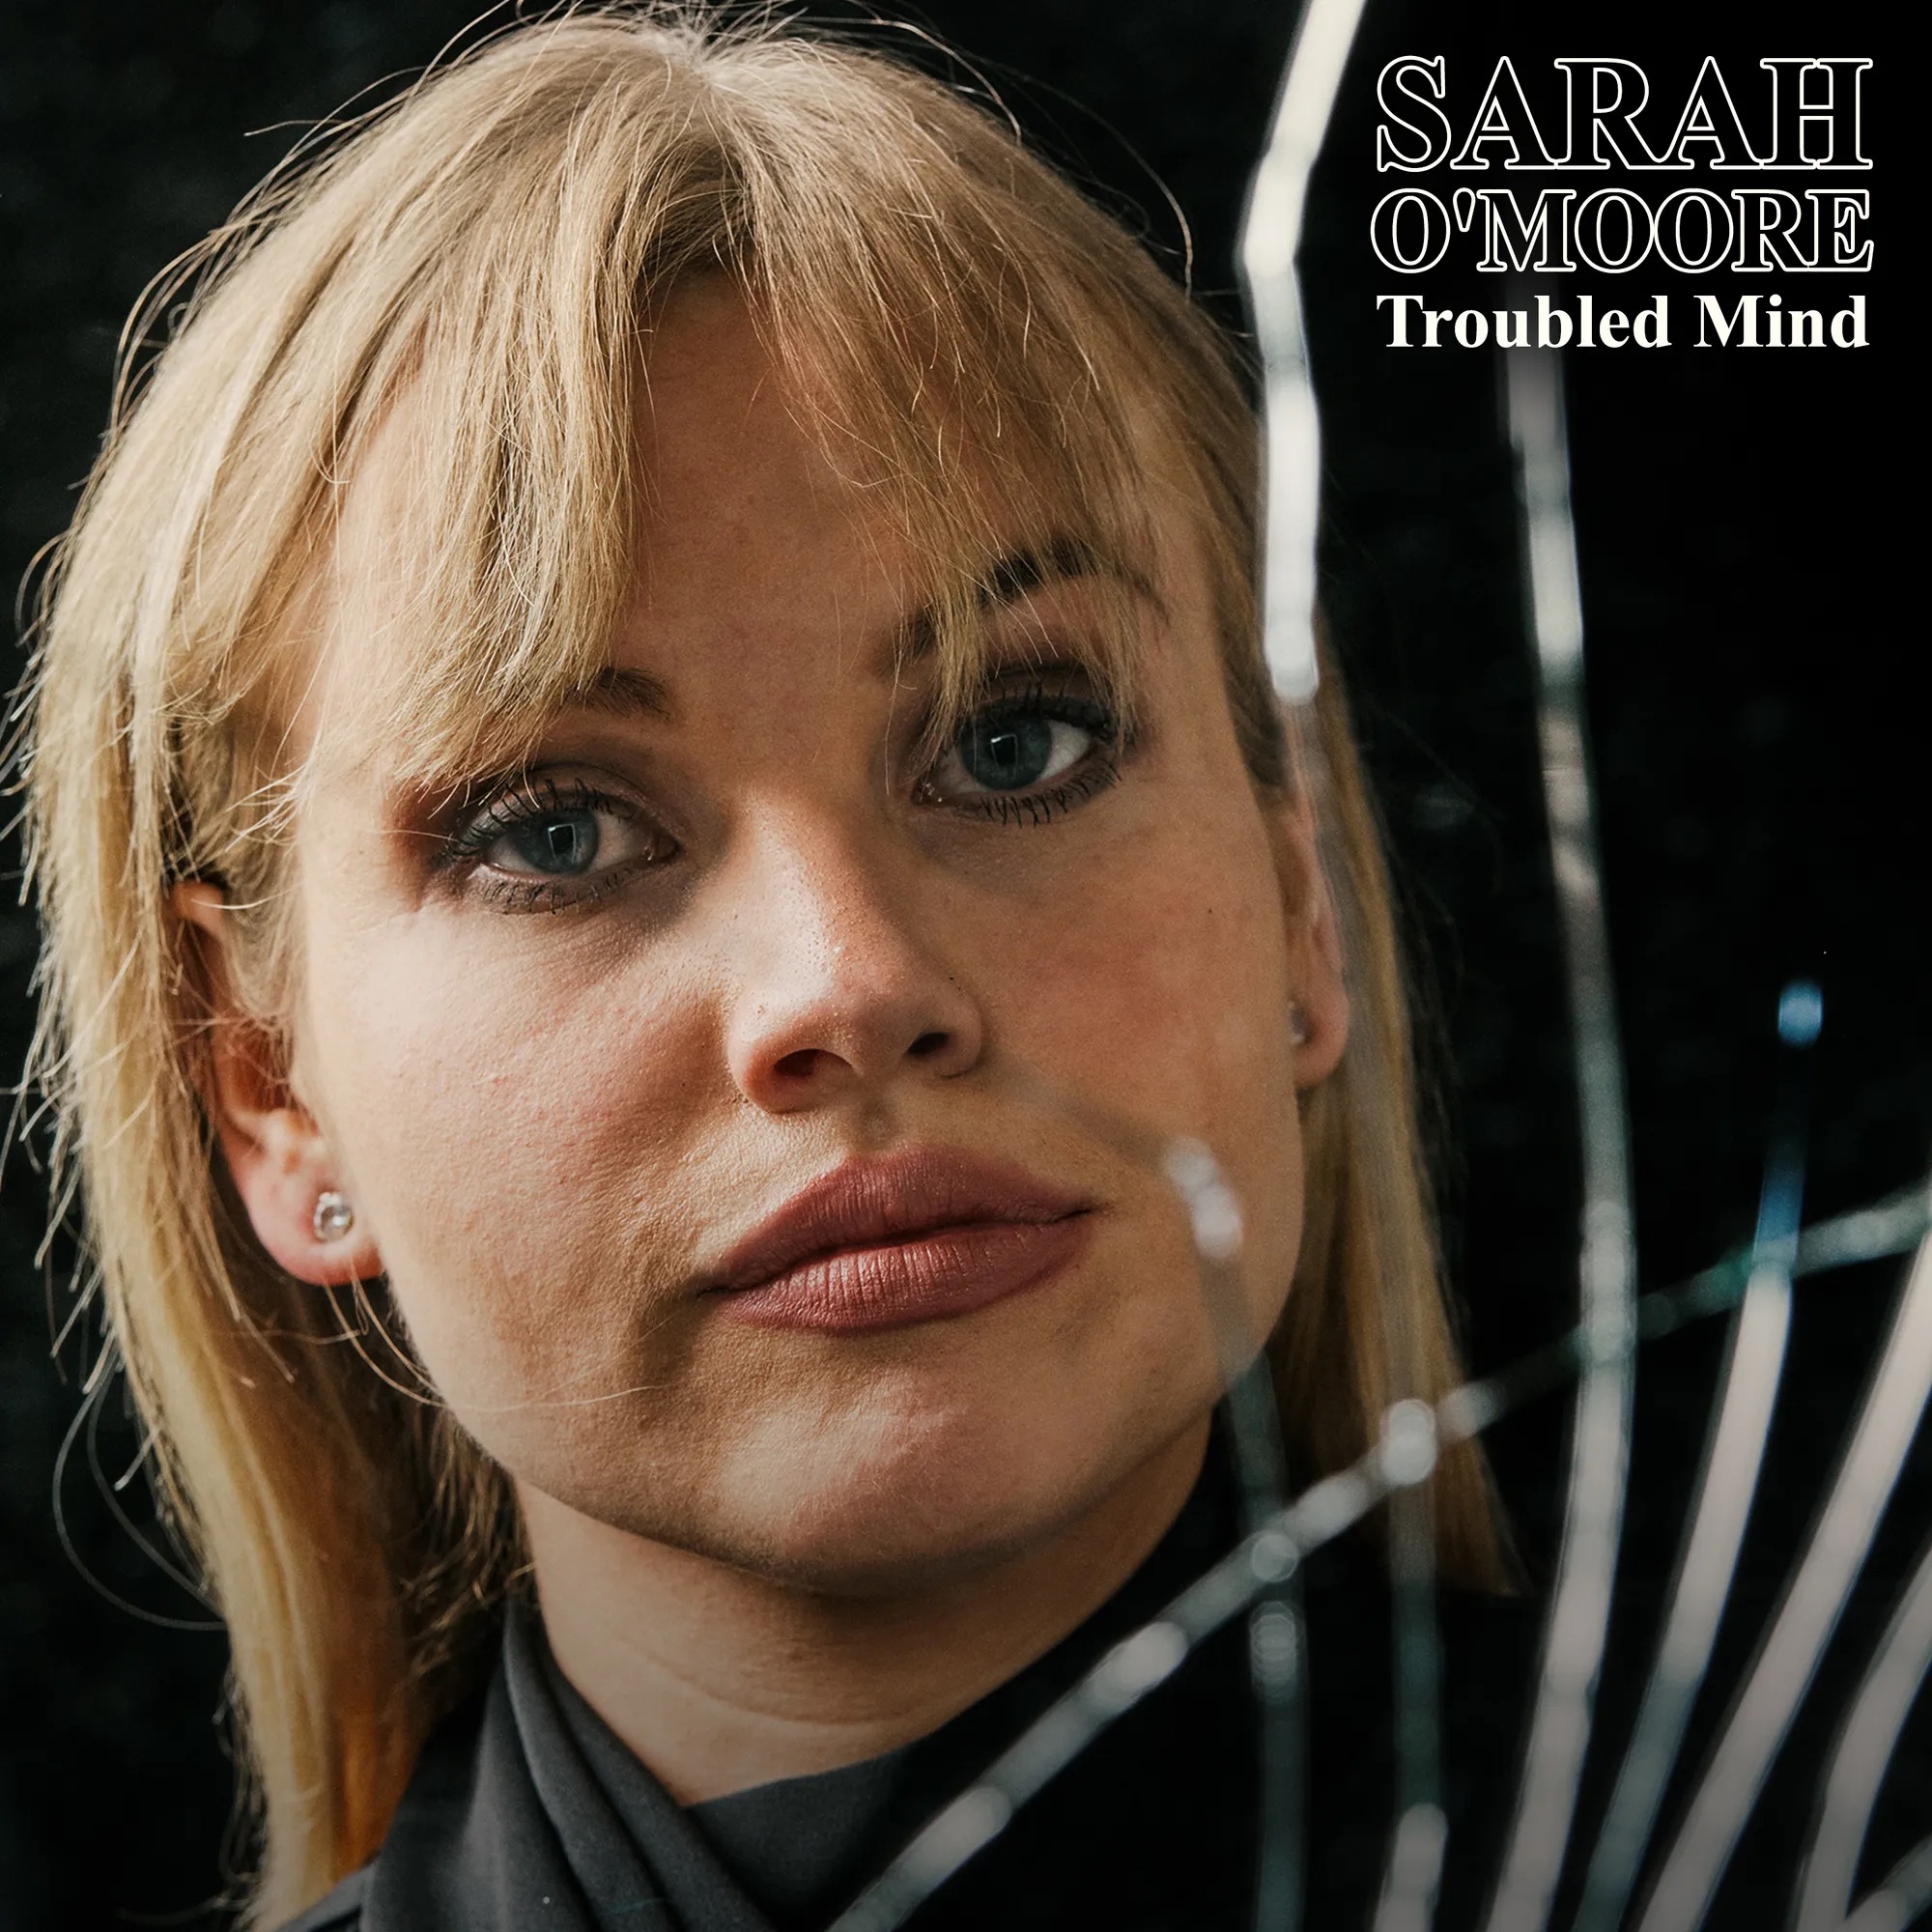 LISTEN: “Troubled Mind” by Sarah O’Moore